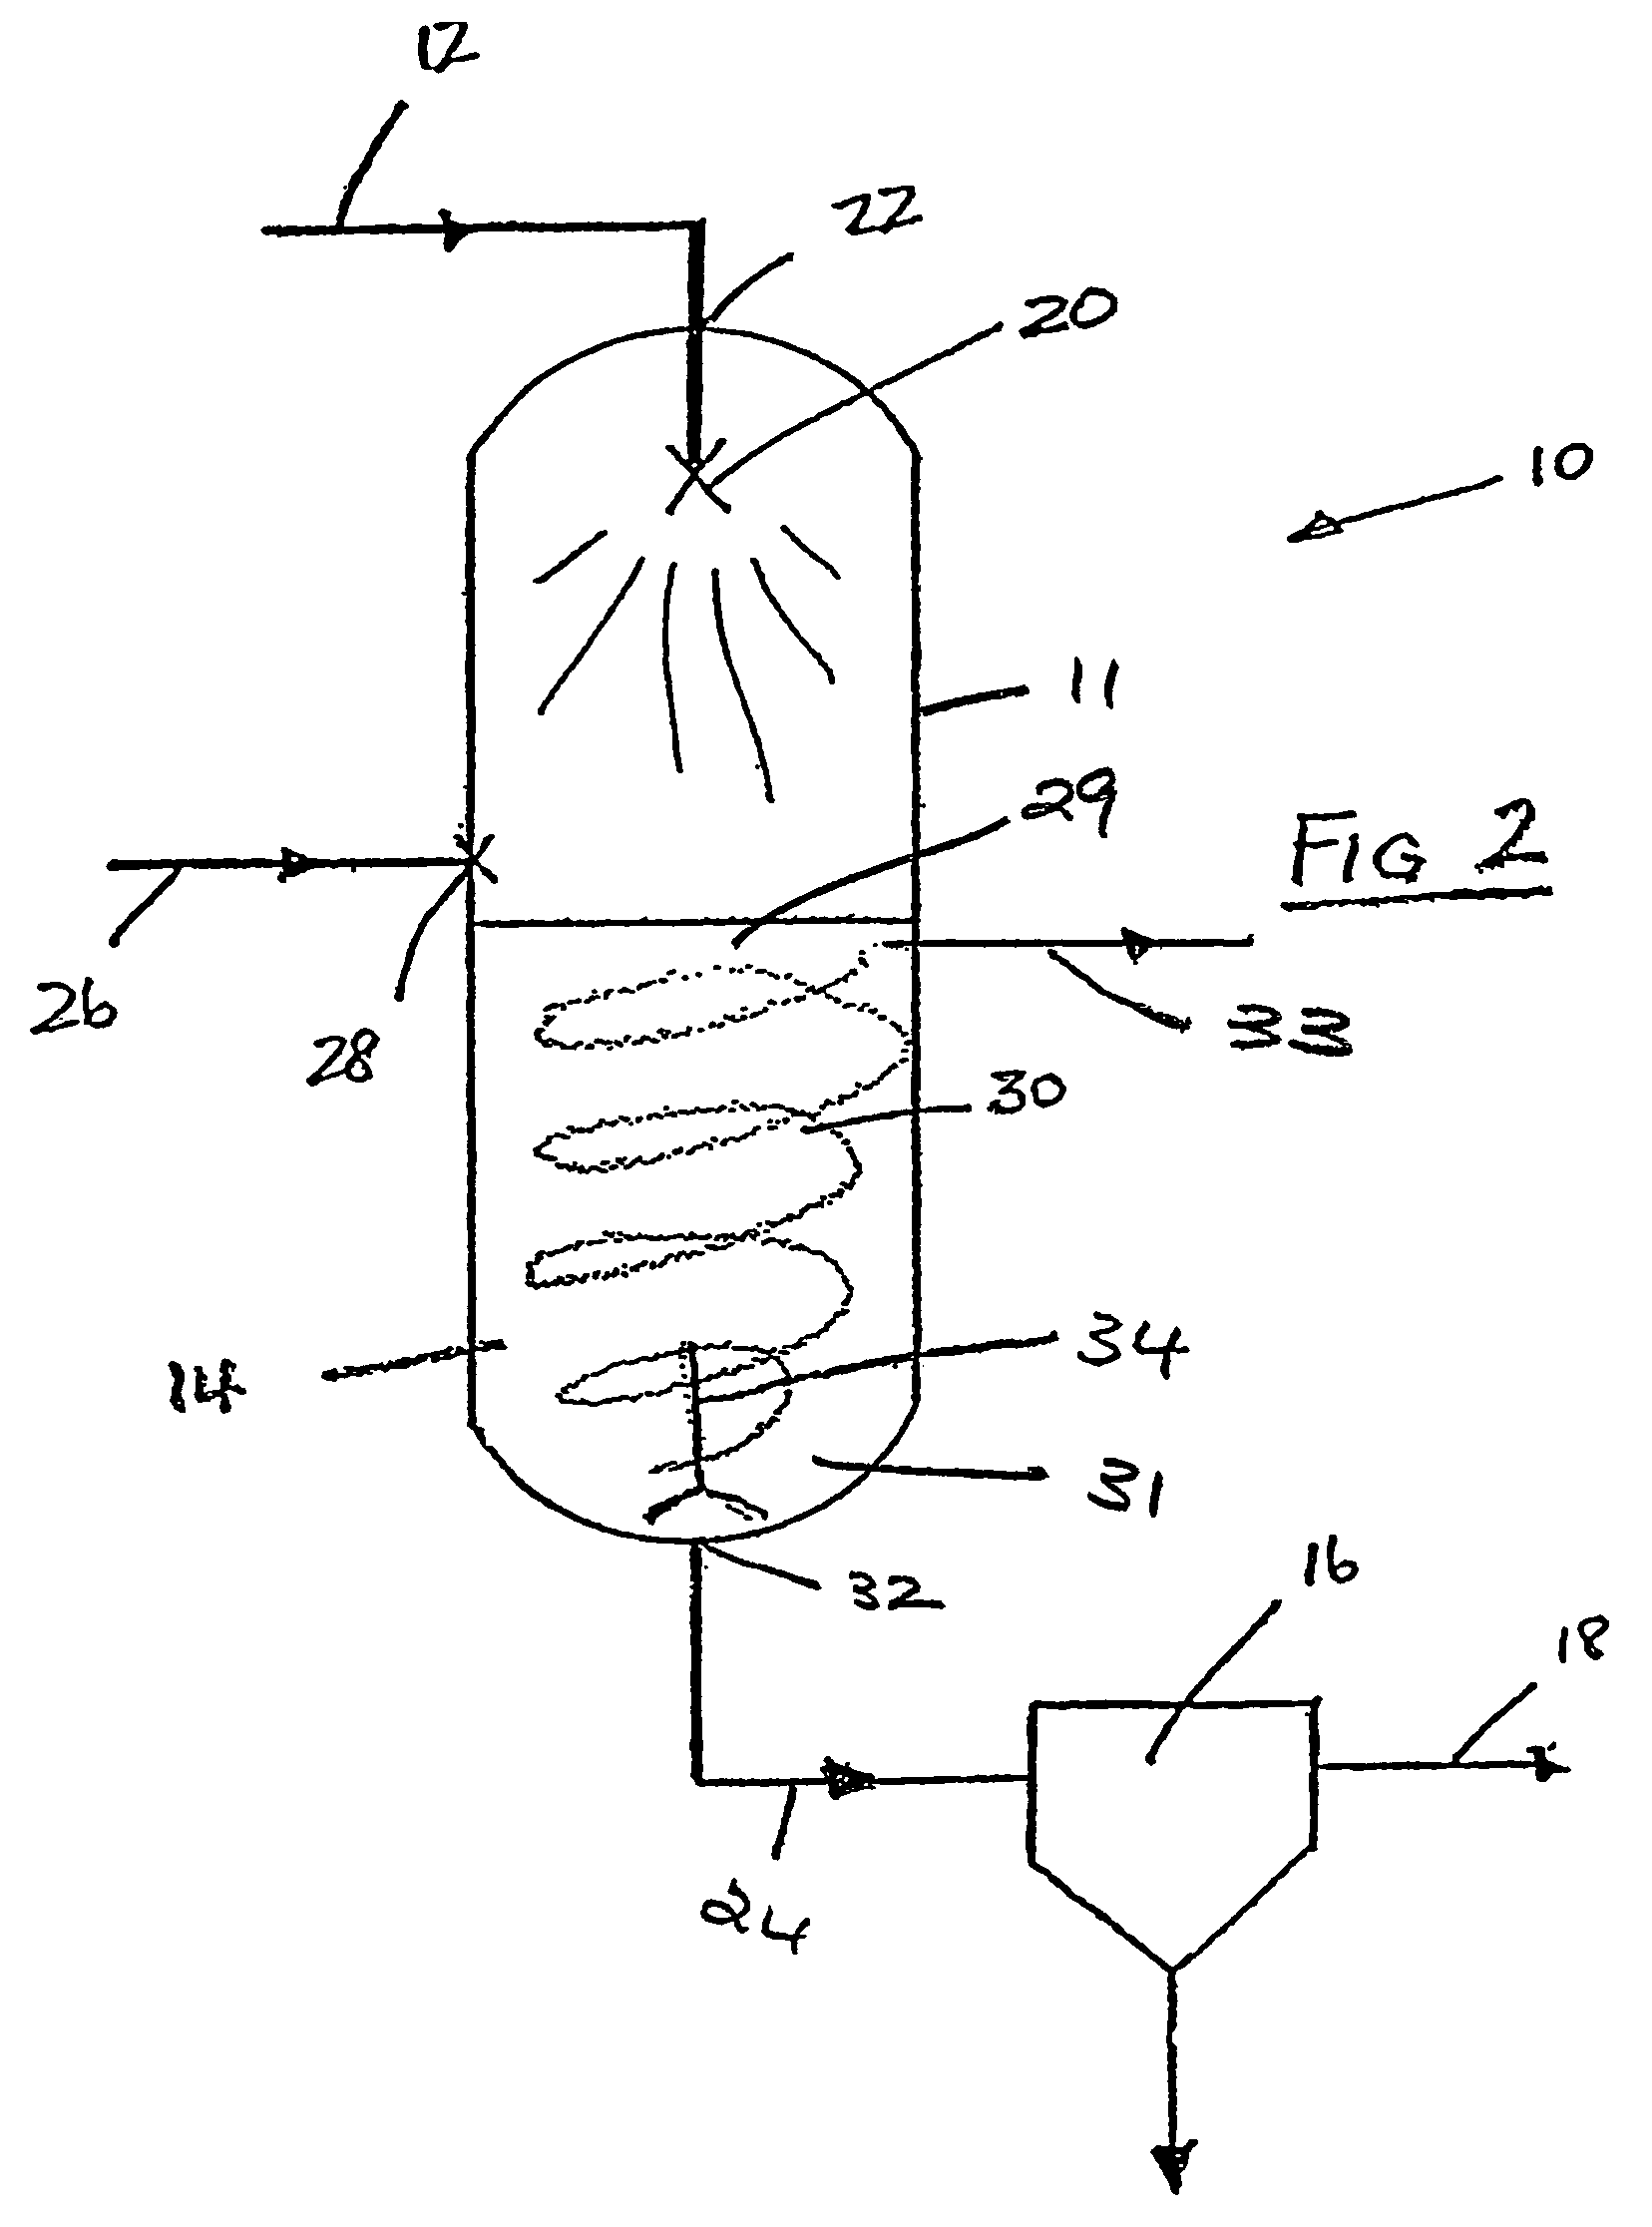 Process and device for production of LNG by removal of freezable solids